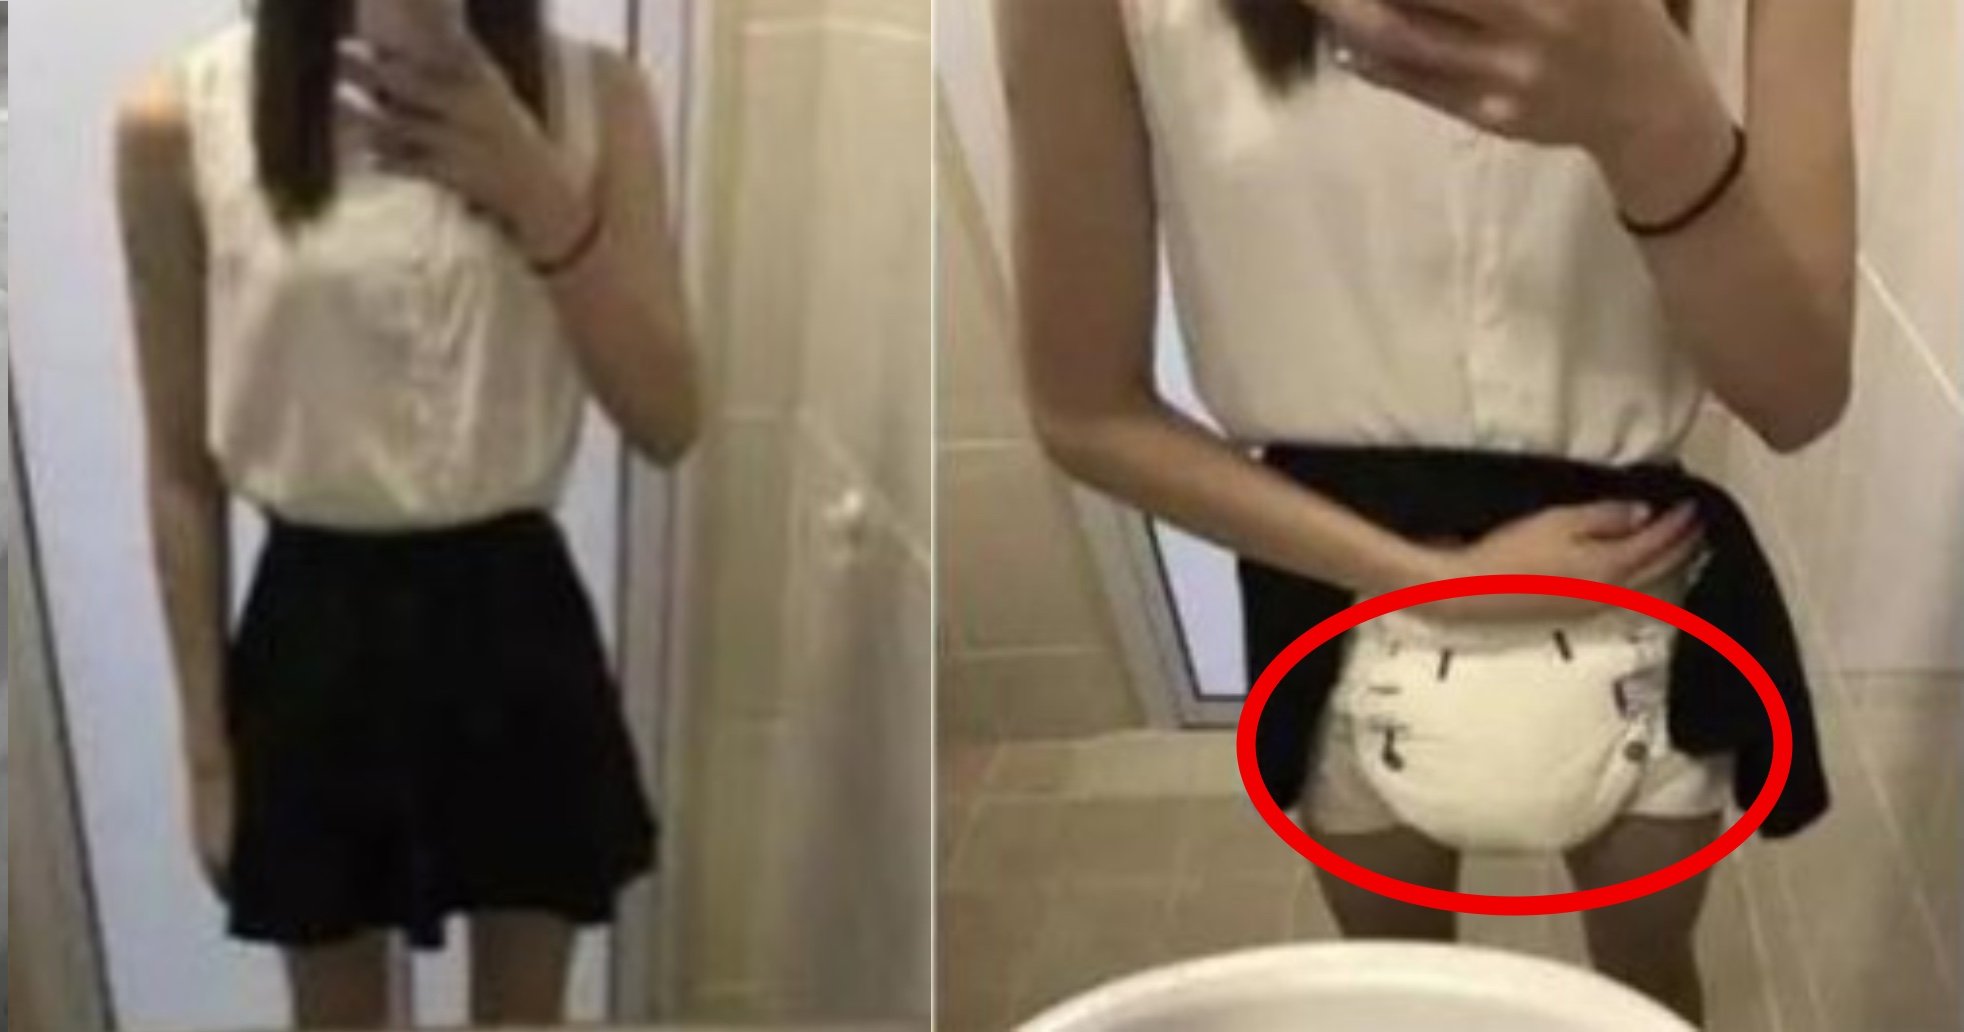 diaper.jpg?resize=1200,630 - 19-Year-Old Girl Who Has To Wear A Diaper Every Day Shares Her Story Of Regret